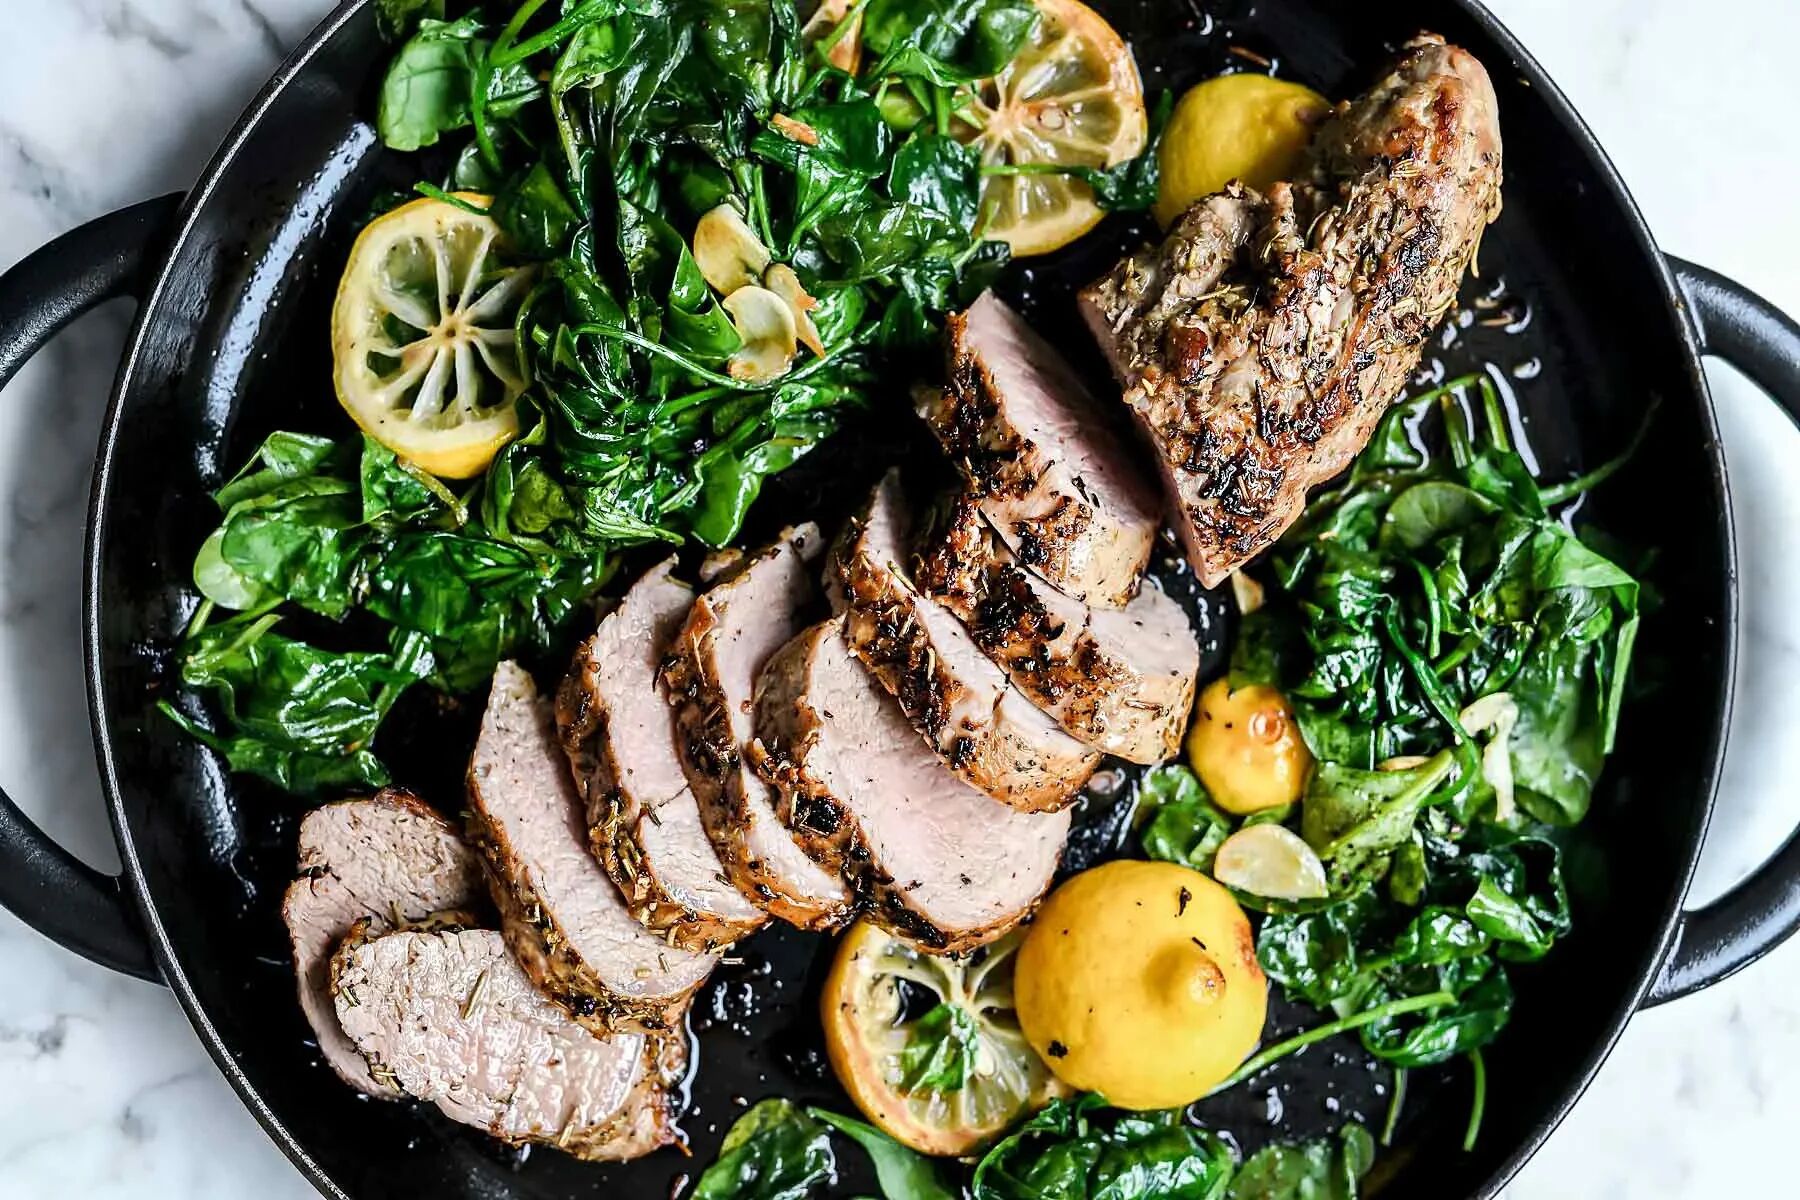 10 Dinner Recipes That Pack Massive Flavor with Herbs — Not Added Fat